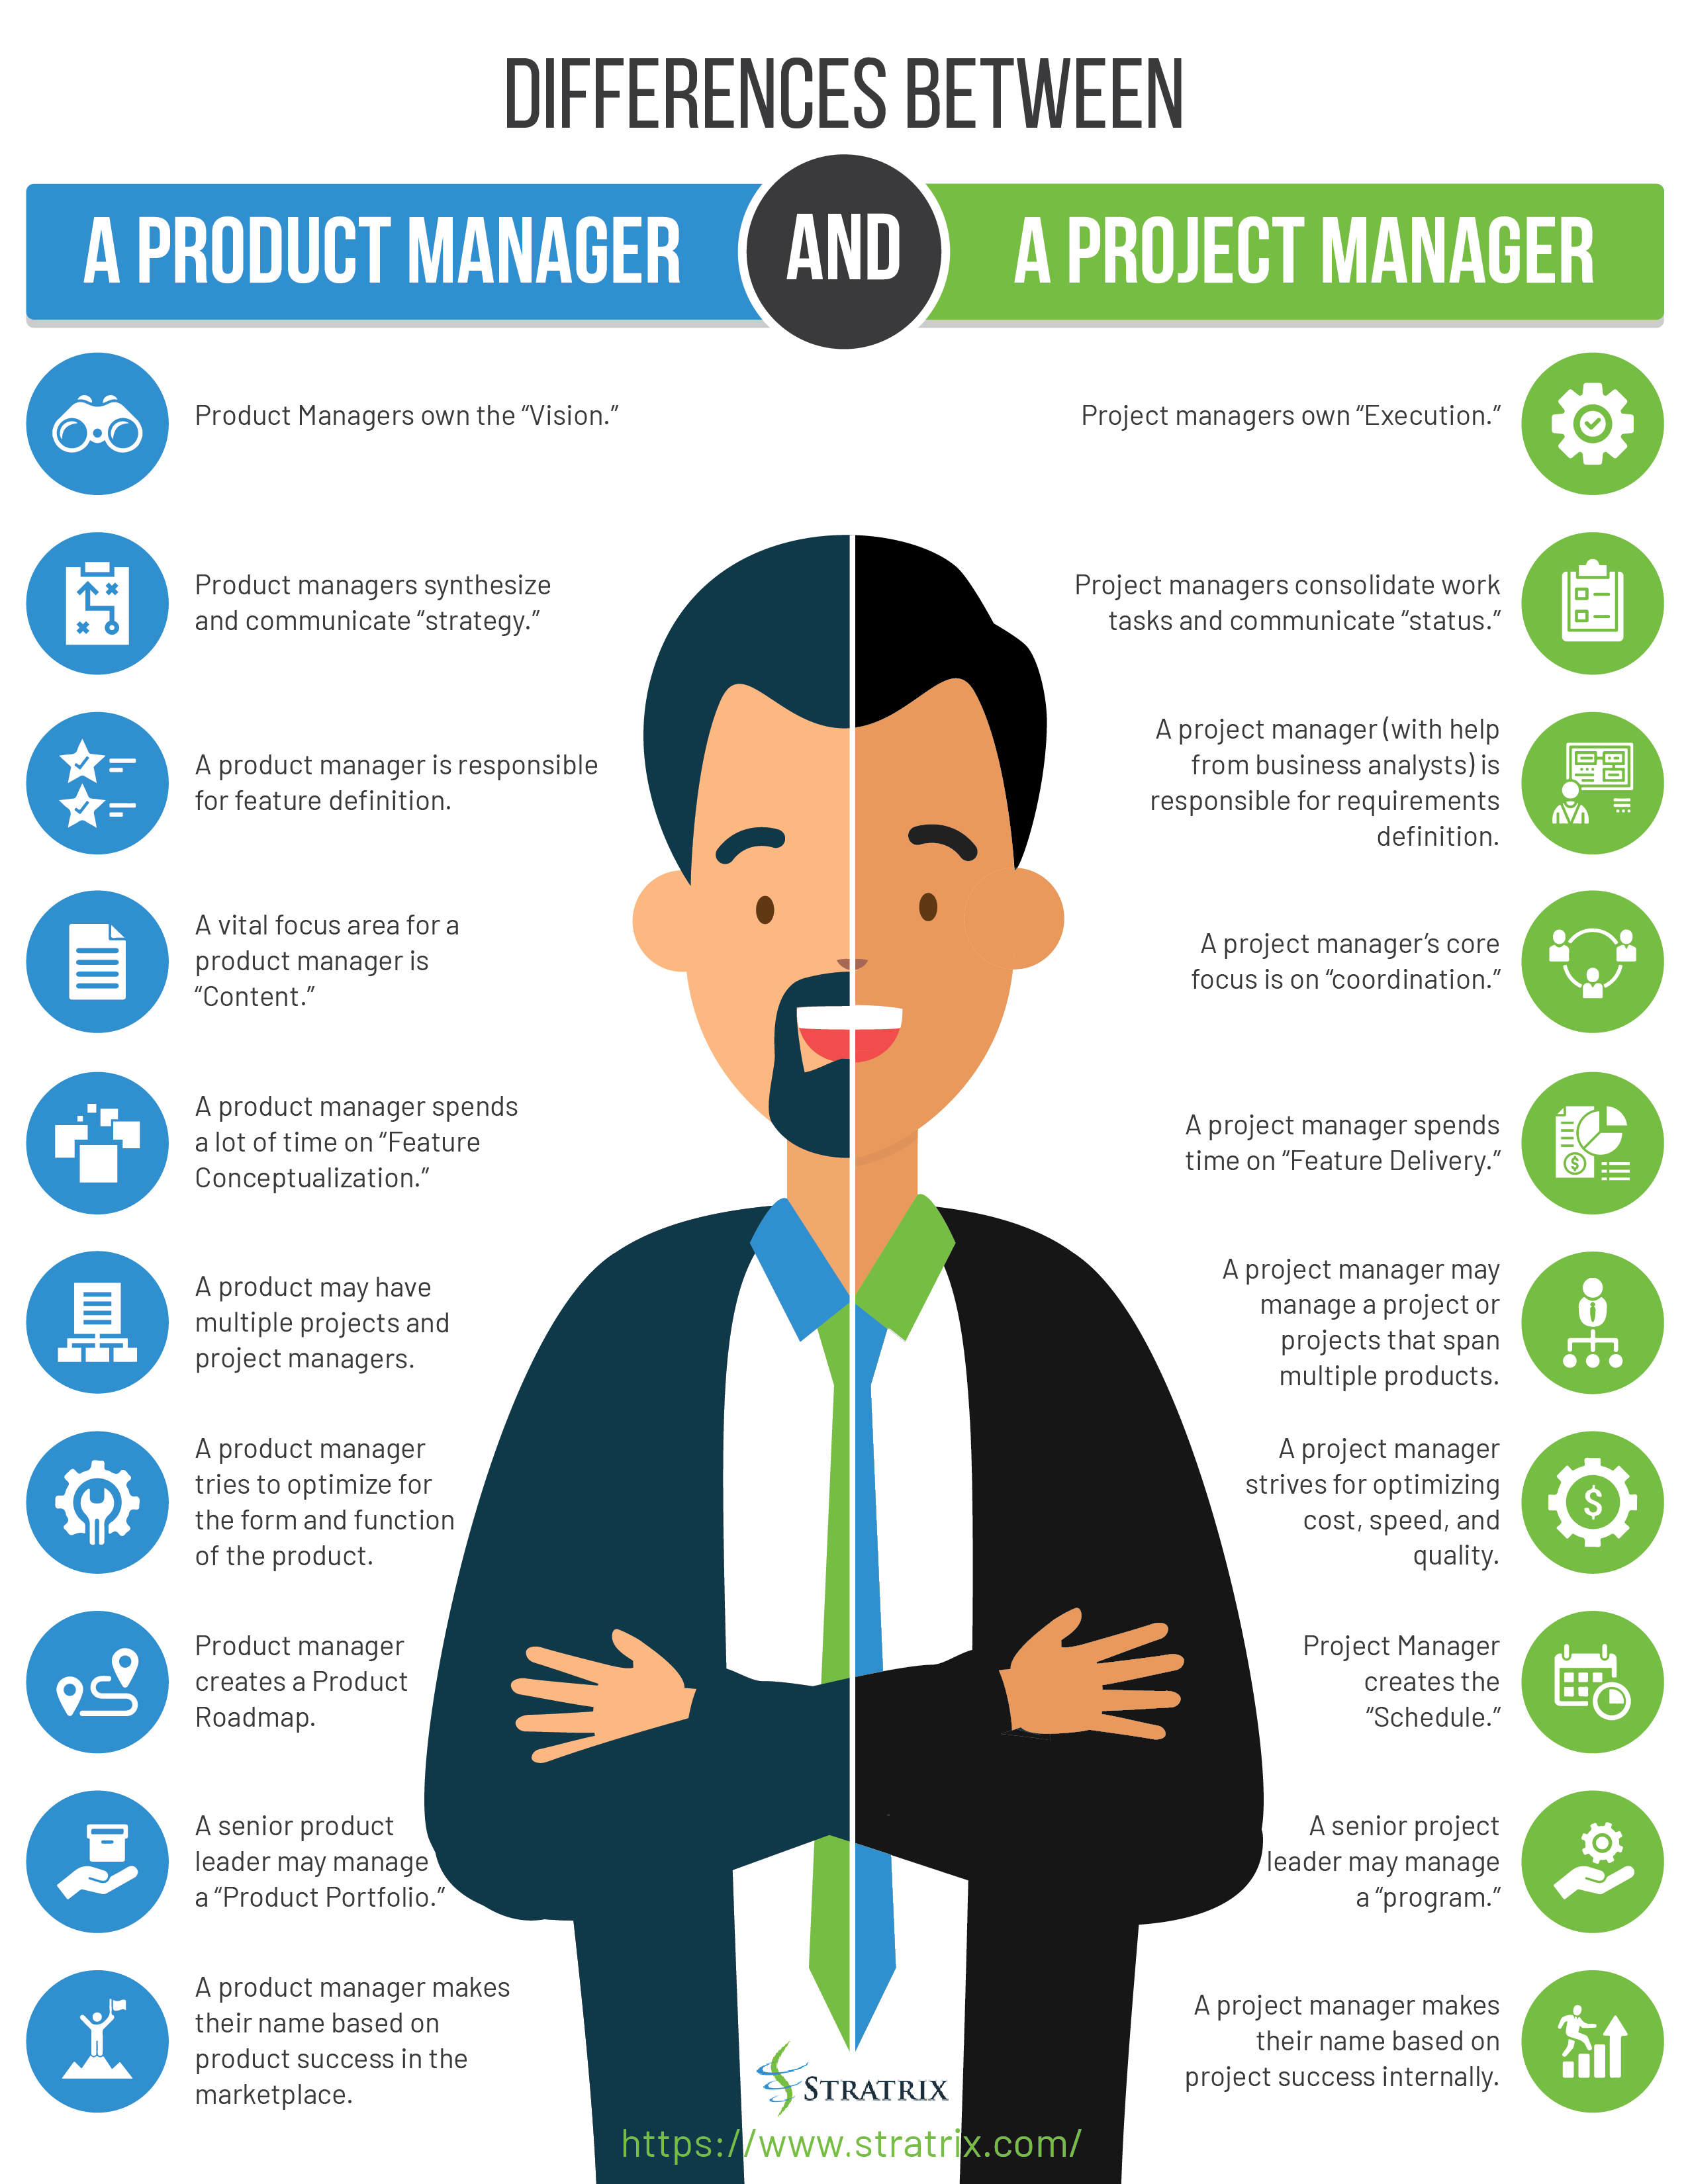 What Is A Project Manager - Image to u